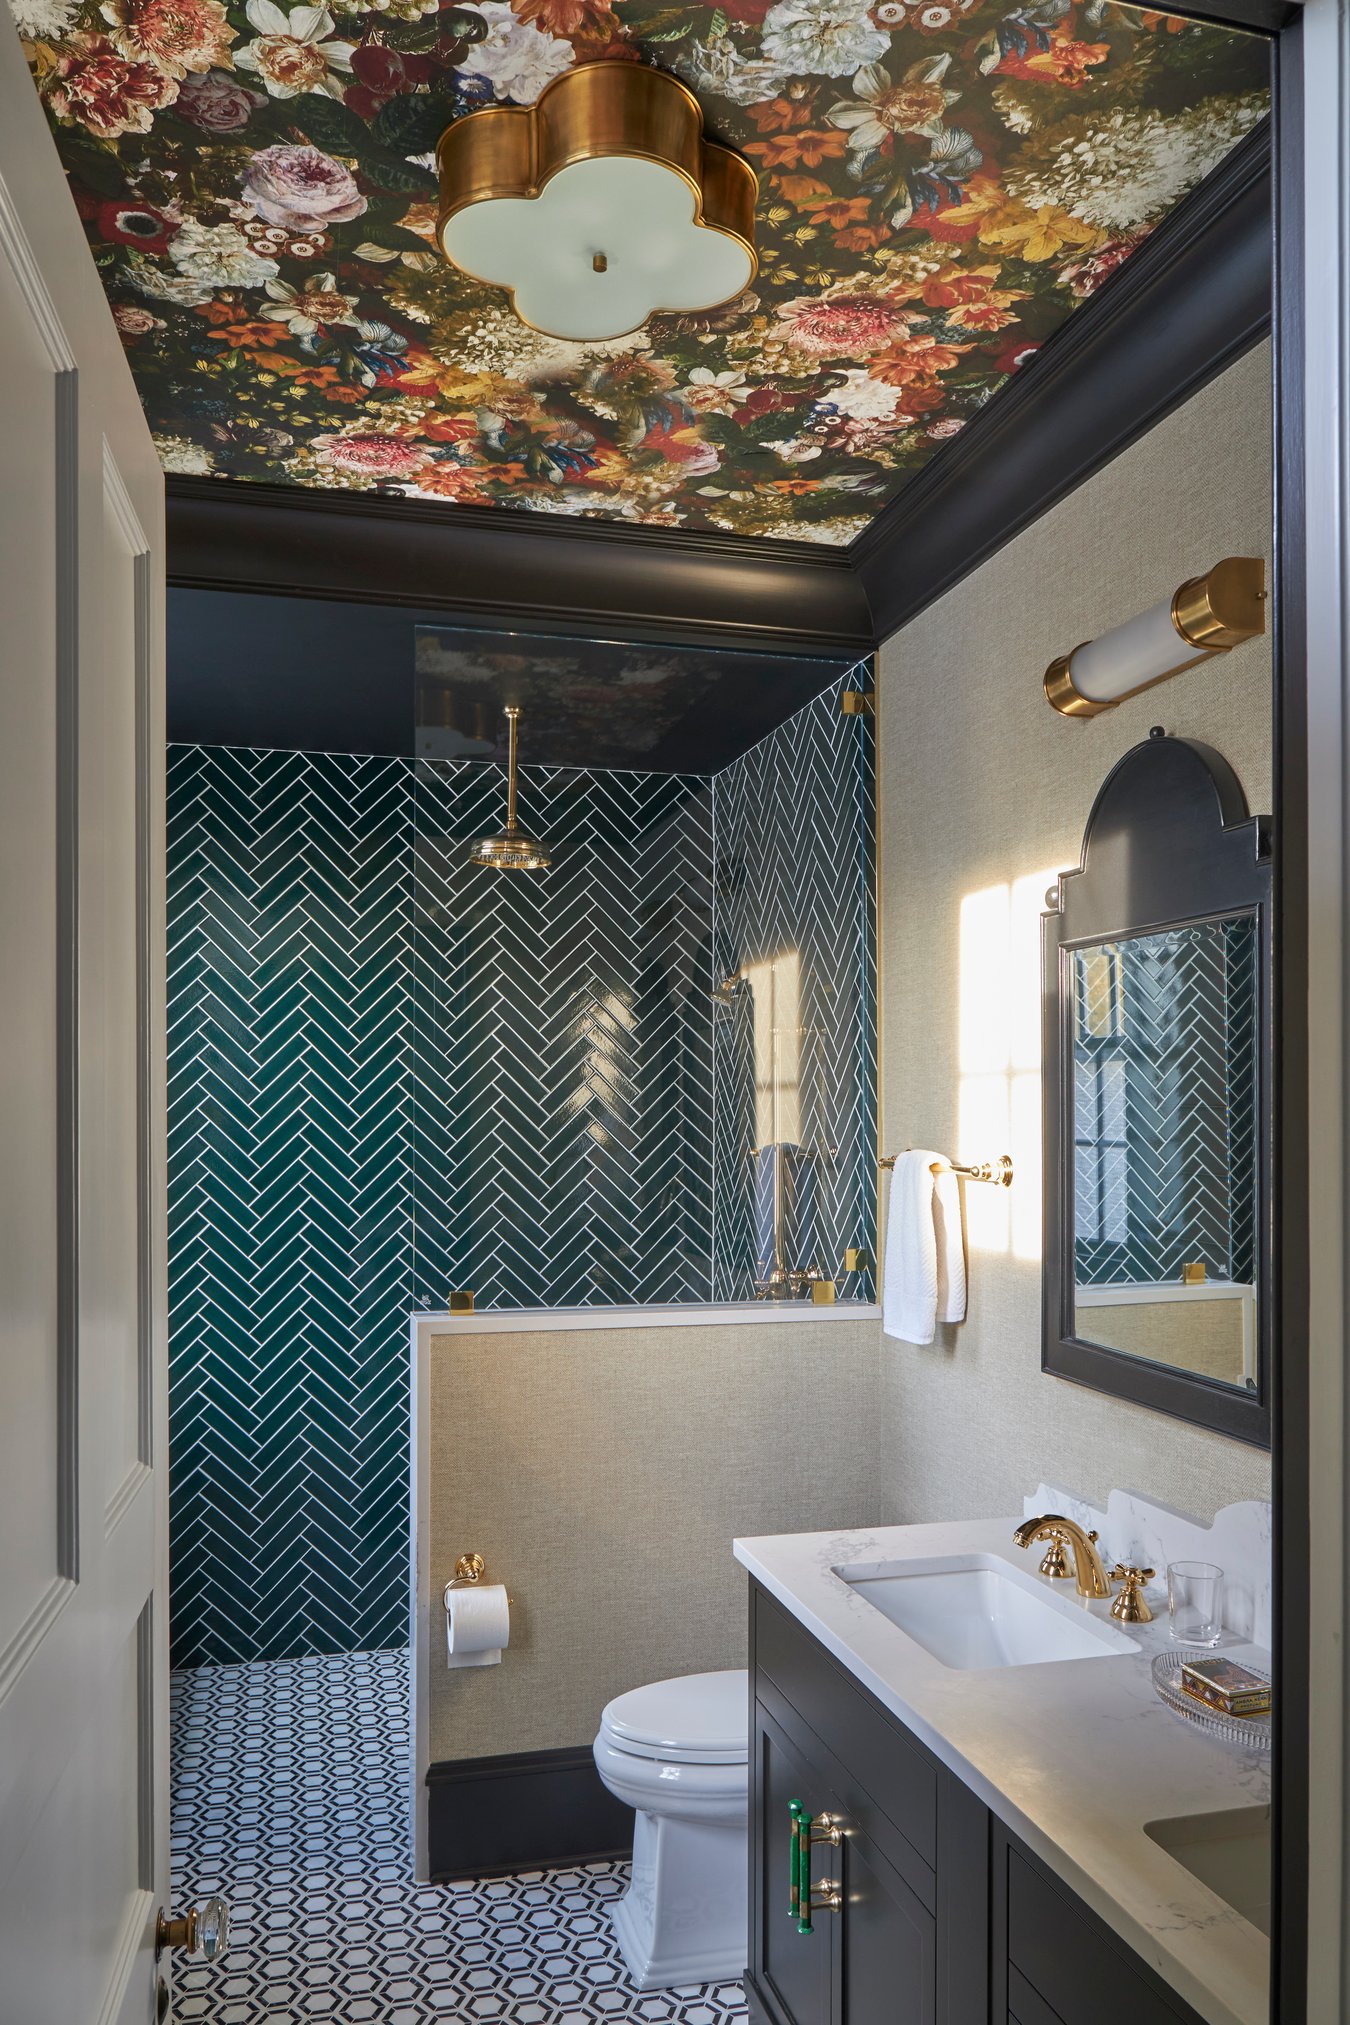 A teal and floral bathroom with subway tiles & brass fixtures in a bathroom designed by Jasmin Reese, Chicago. 